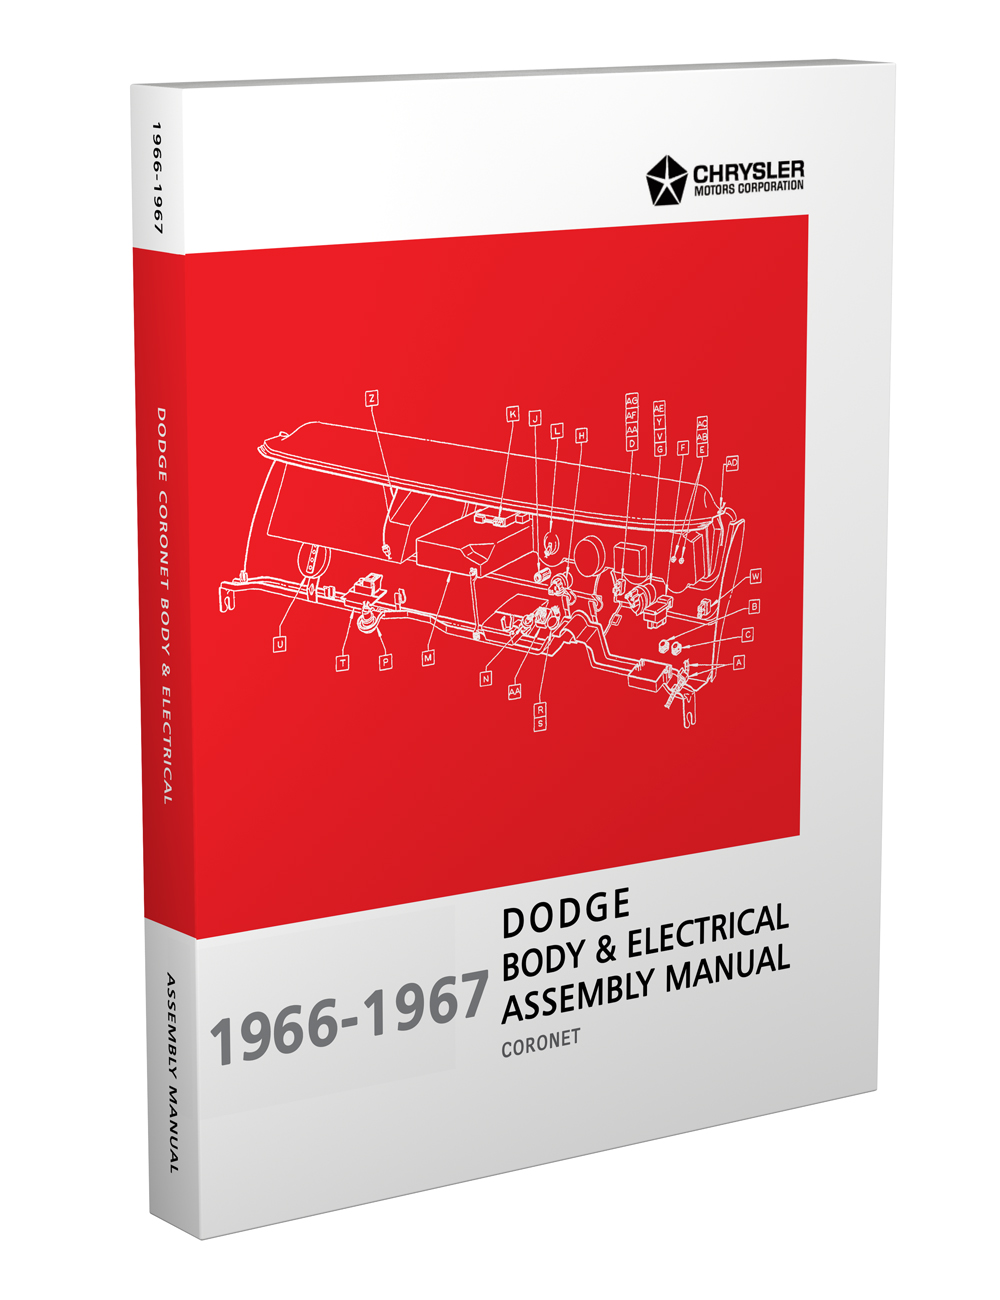 1966-1967 Dodge Coronet Body & Electrical Assembly Manual Reprint